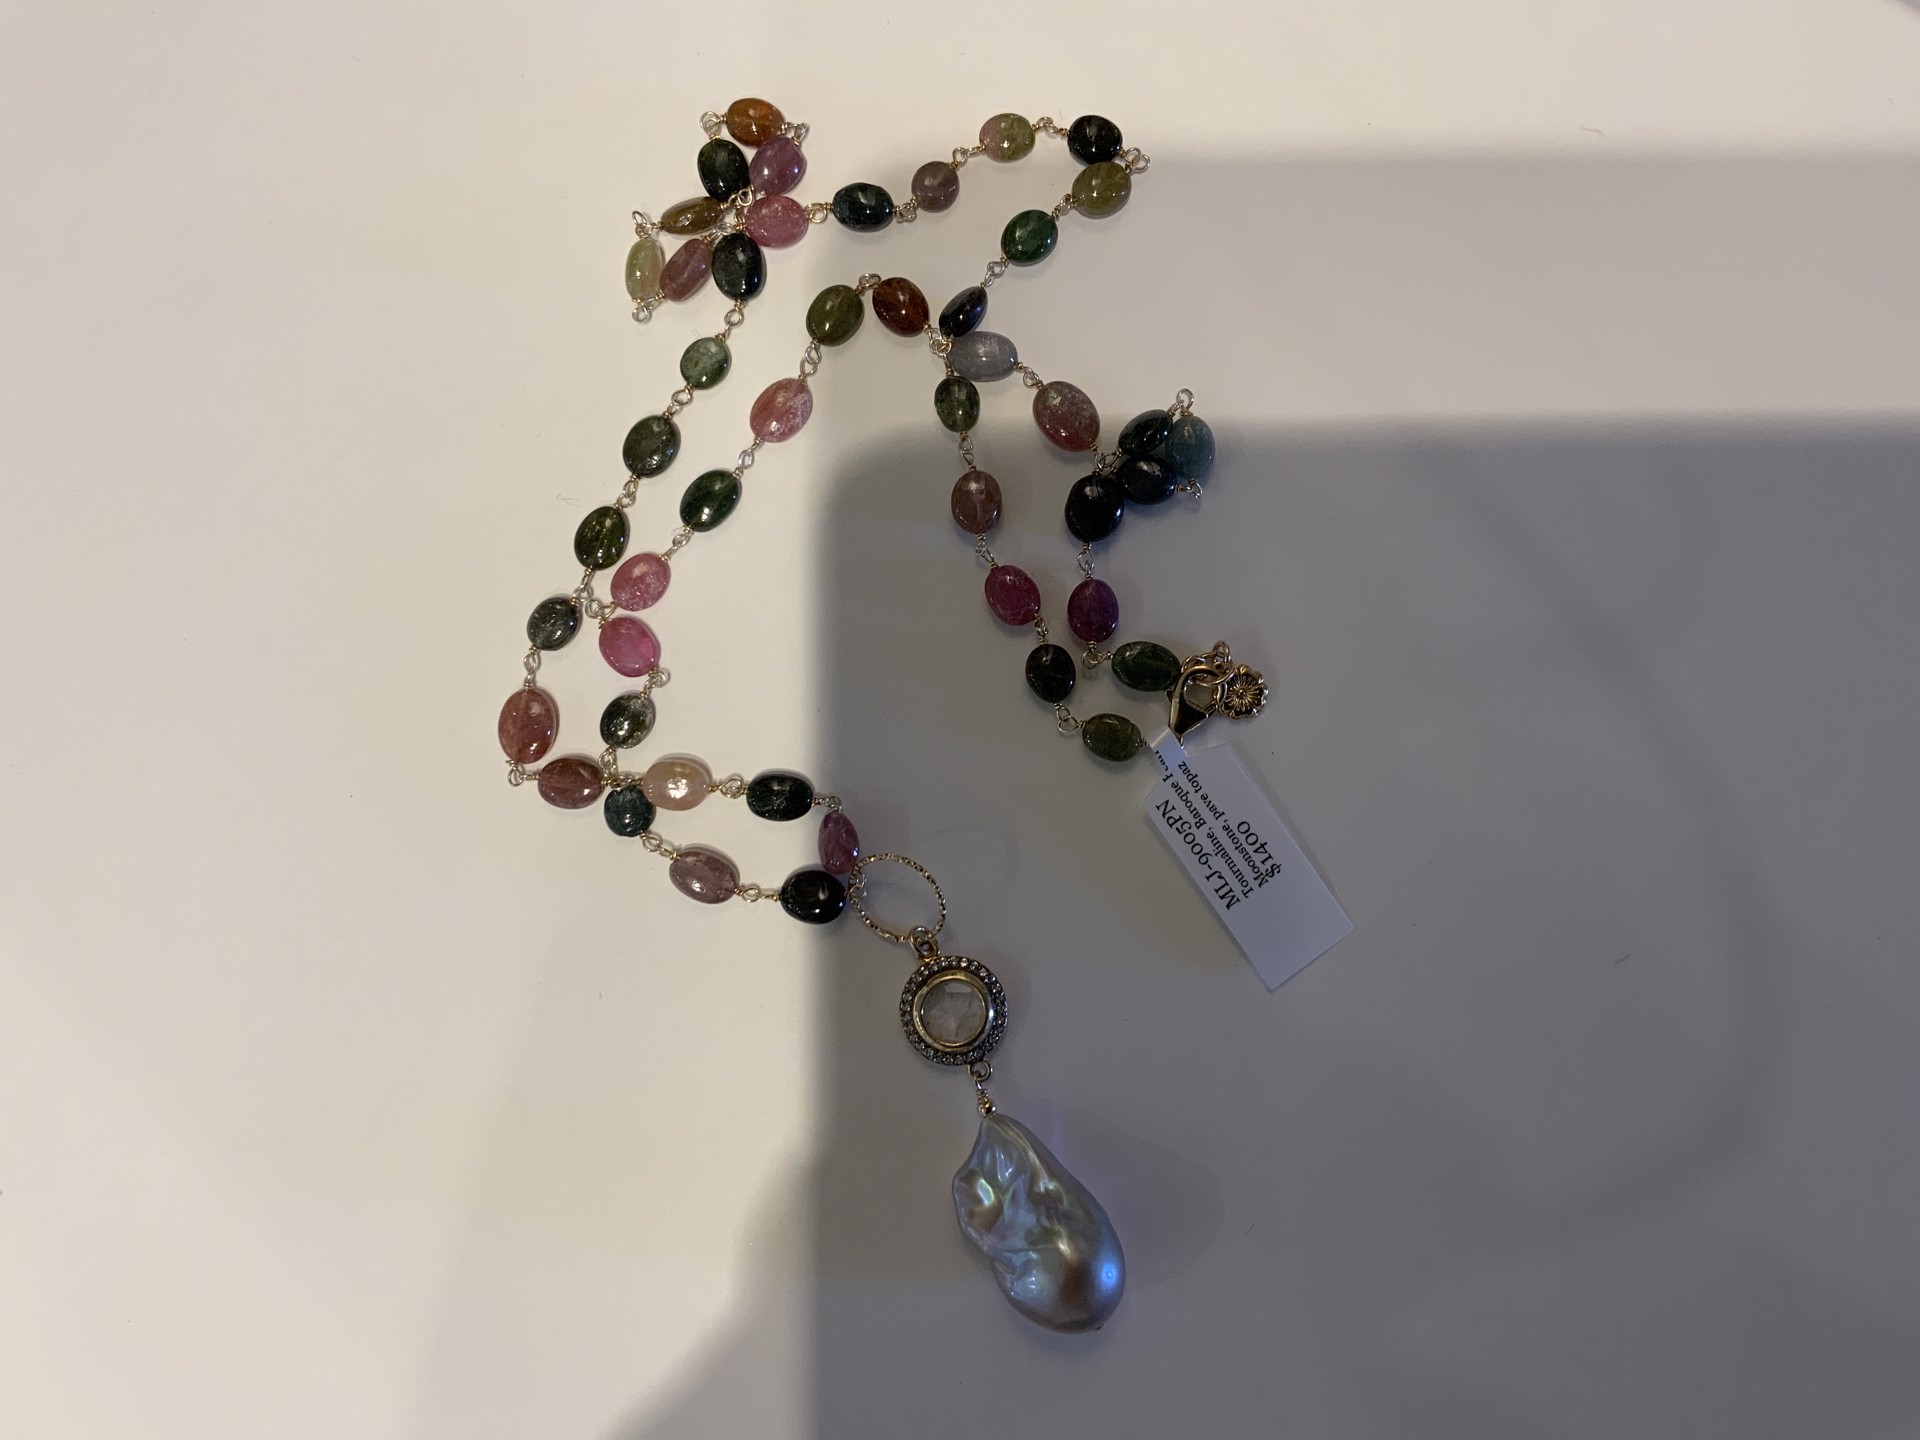 Tourmaline, Baroque Pearl, Moonstone, and Pave Topaz by Melinda Lawton Jewelry